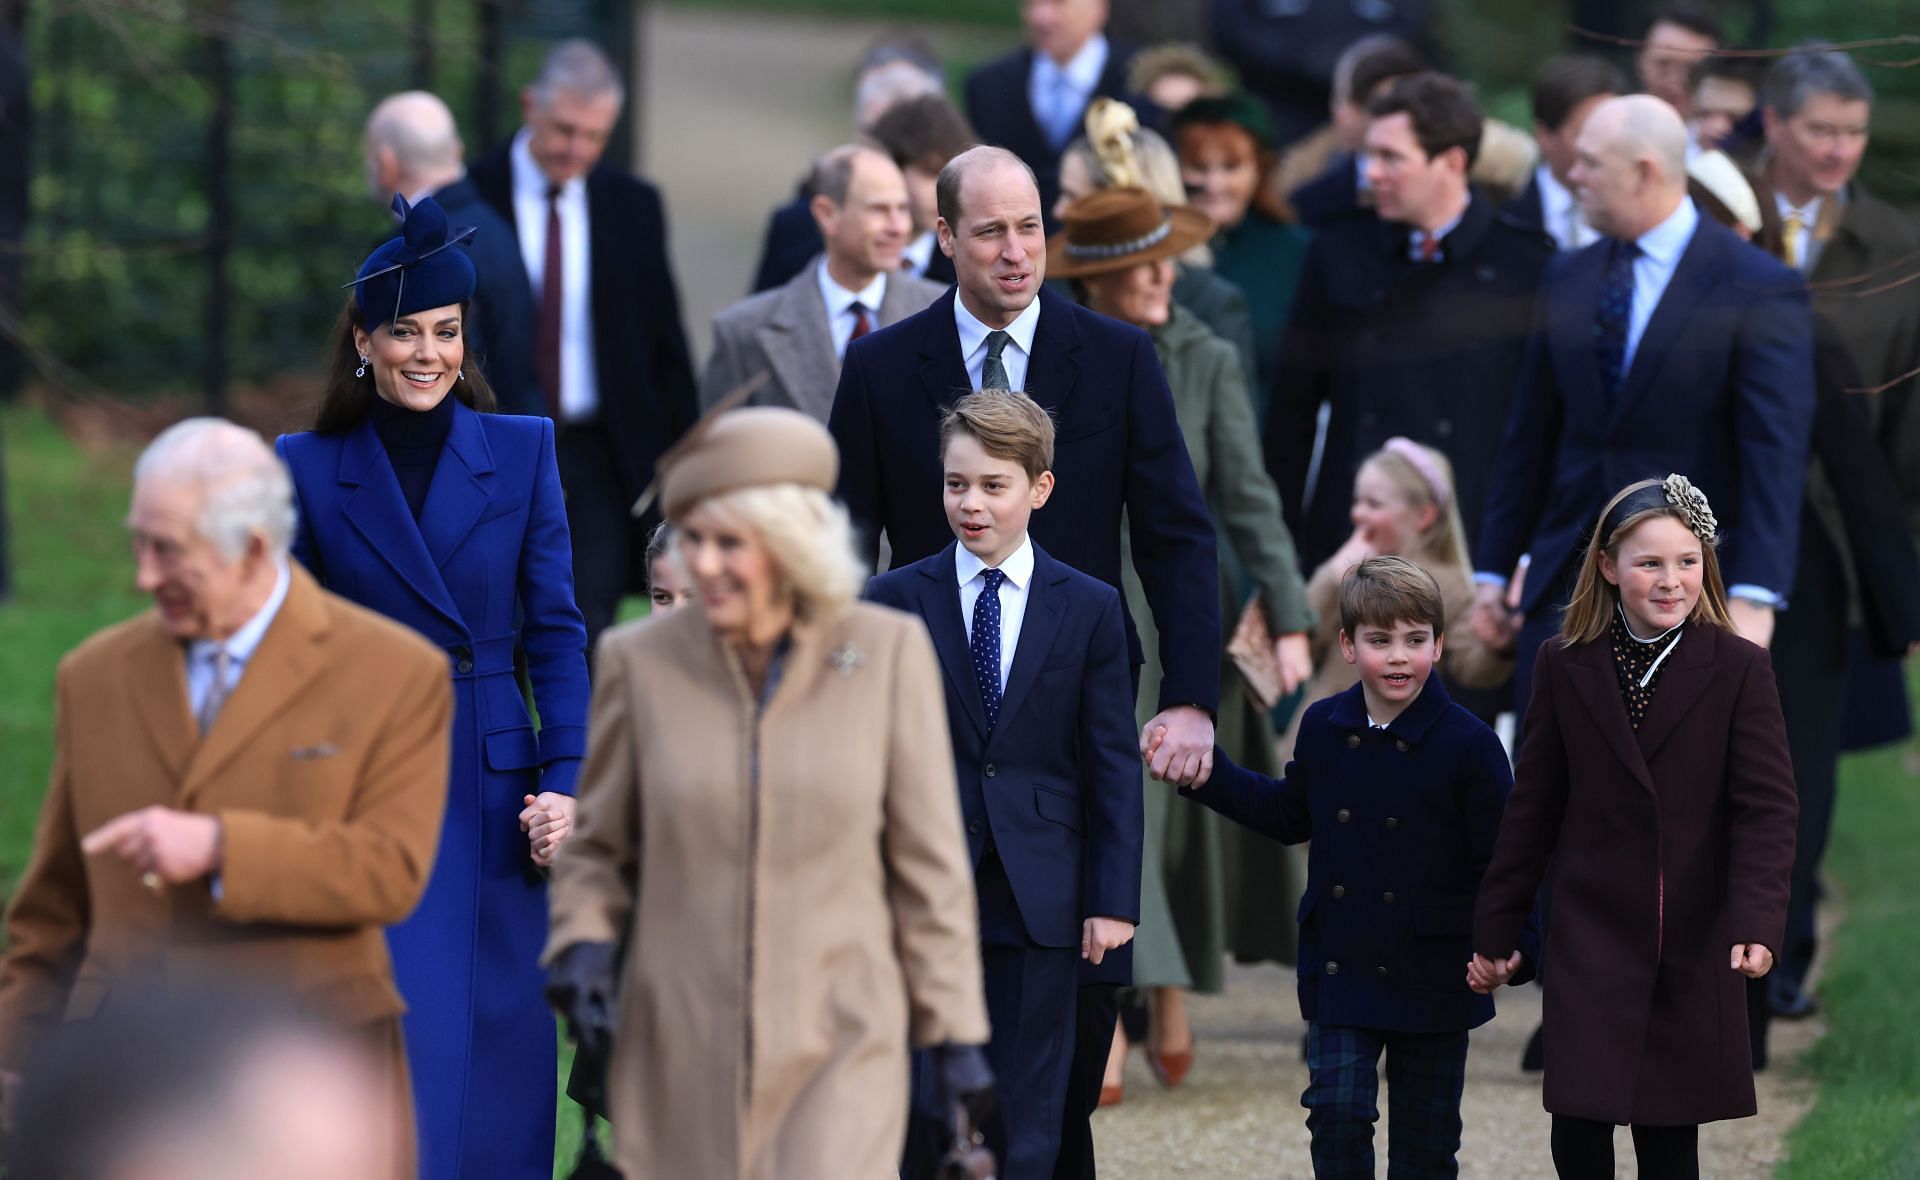 The British Royal Family Attend The Christmas Morning Service (Image via Getty / @Stephen Pond)